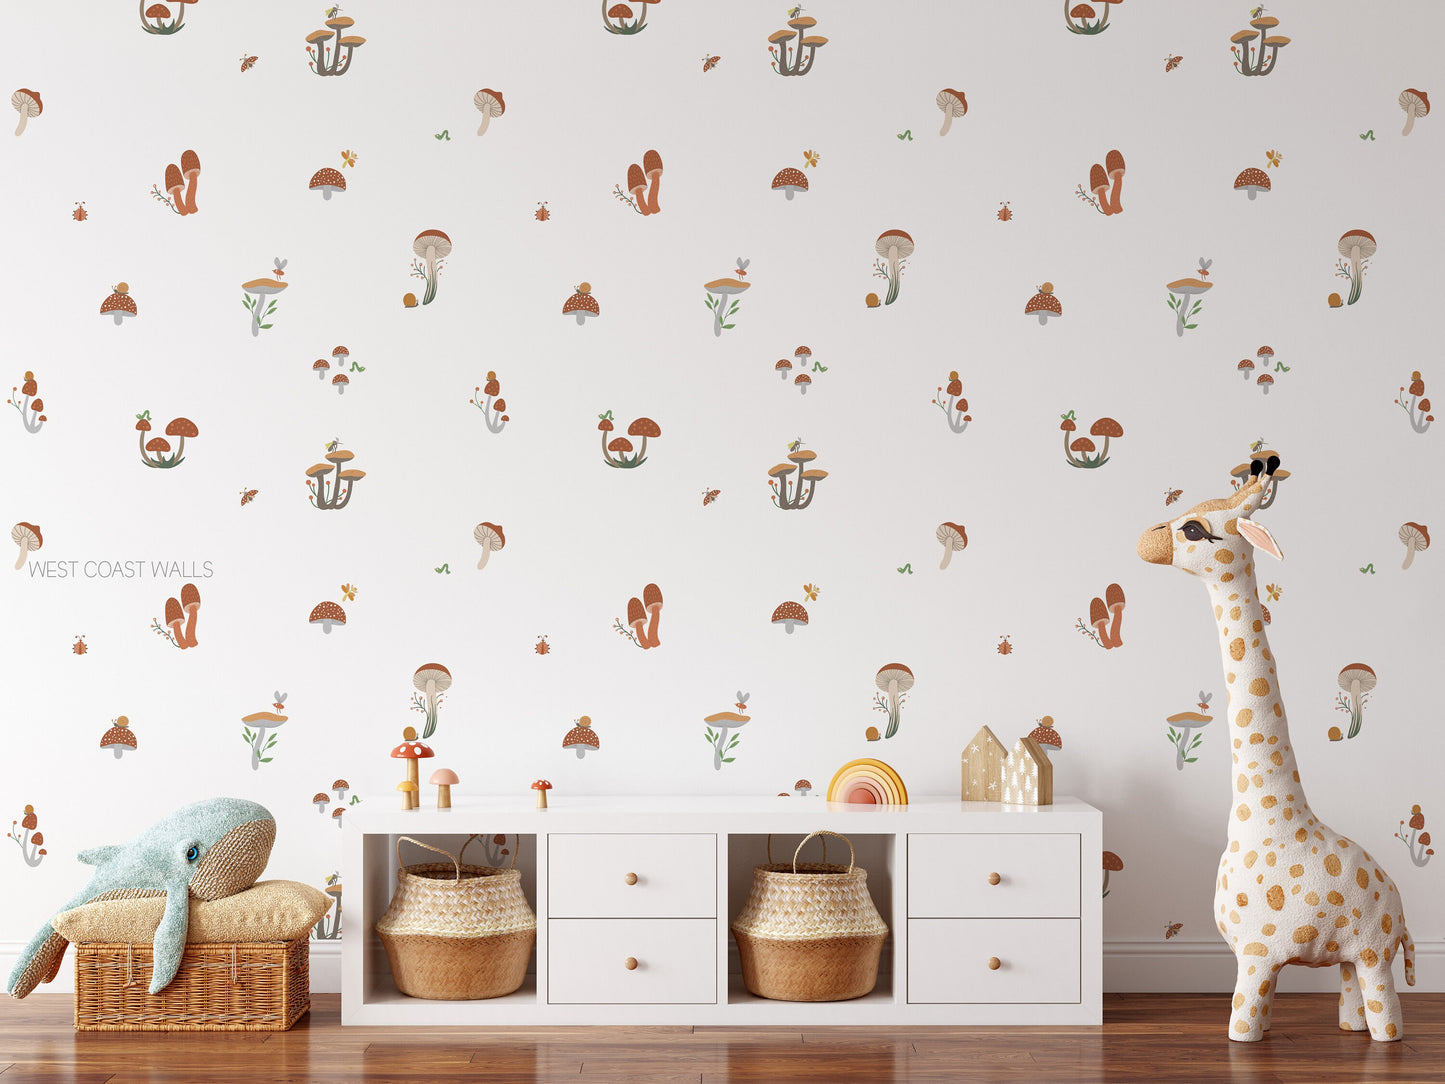 Wild Mushroom Removable Wall Decals